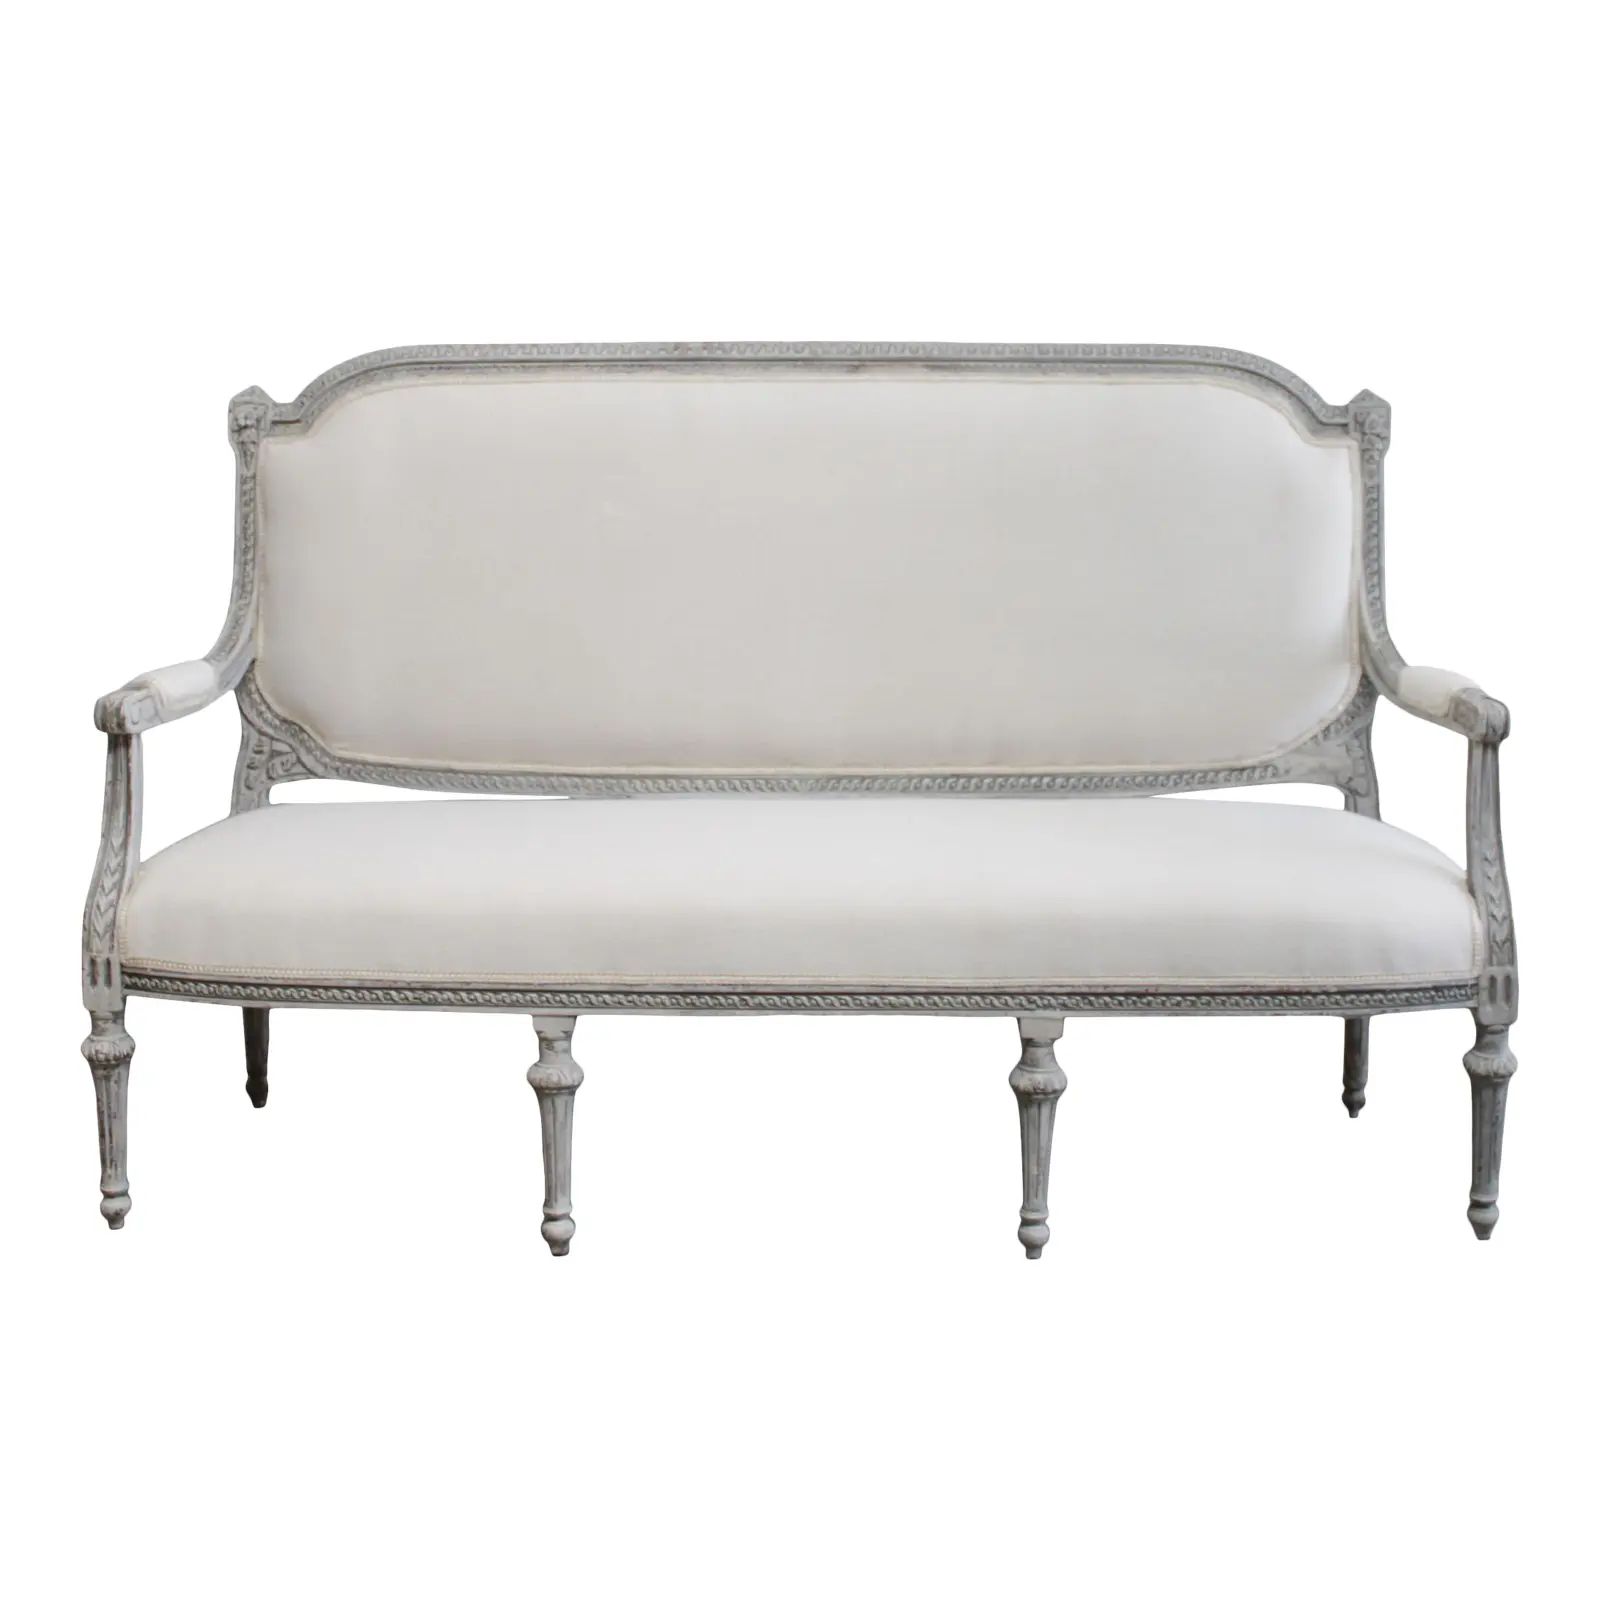 Vintage Painted and Upholstered Louis XVI Style Open Arm Sofa Settee | Chairish